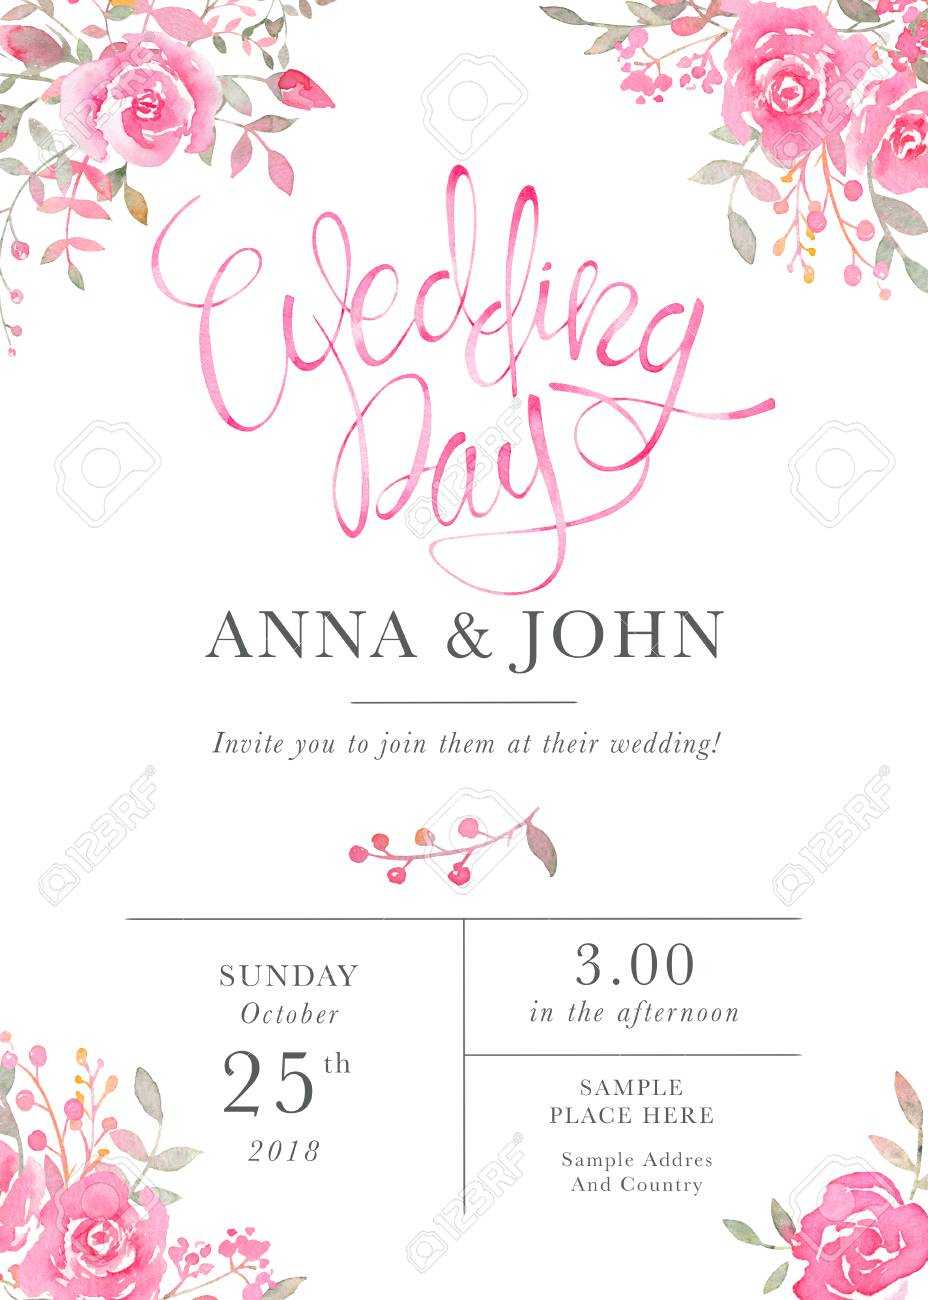 Wedding Invitation Card Template With Watercolor Rose Flowers Throughout Free E Wedding Invitation Card Templates